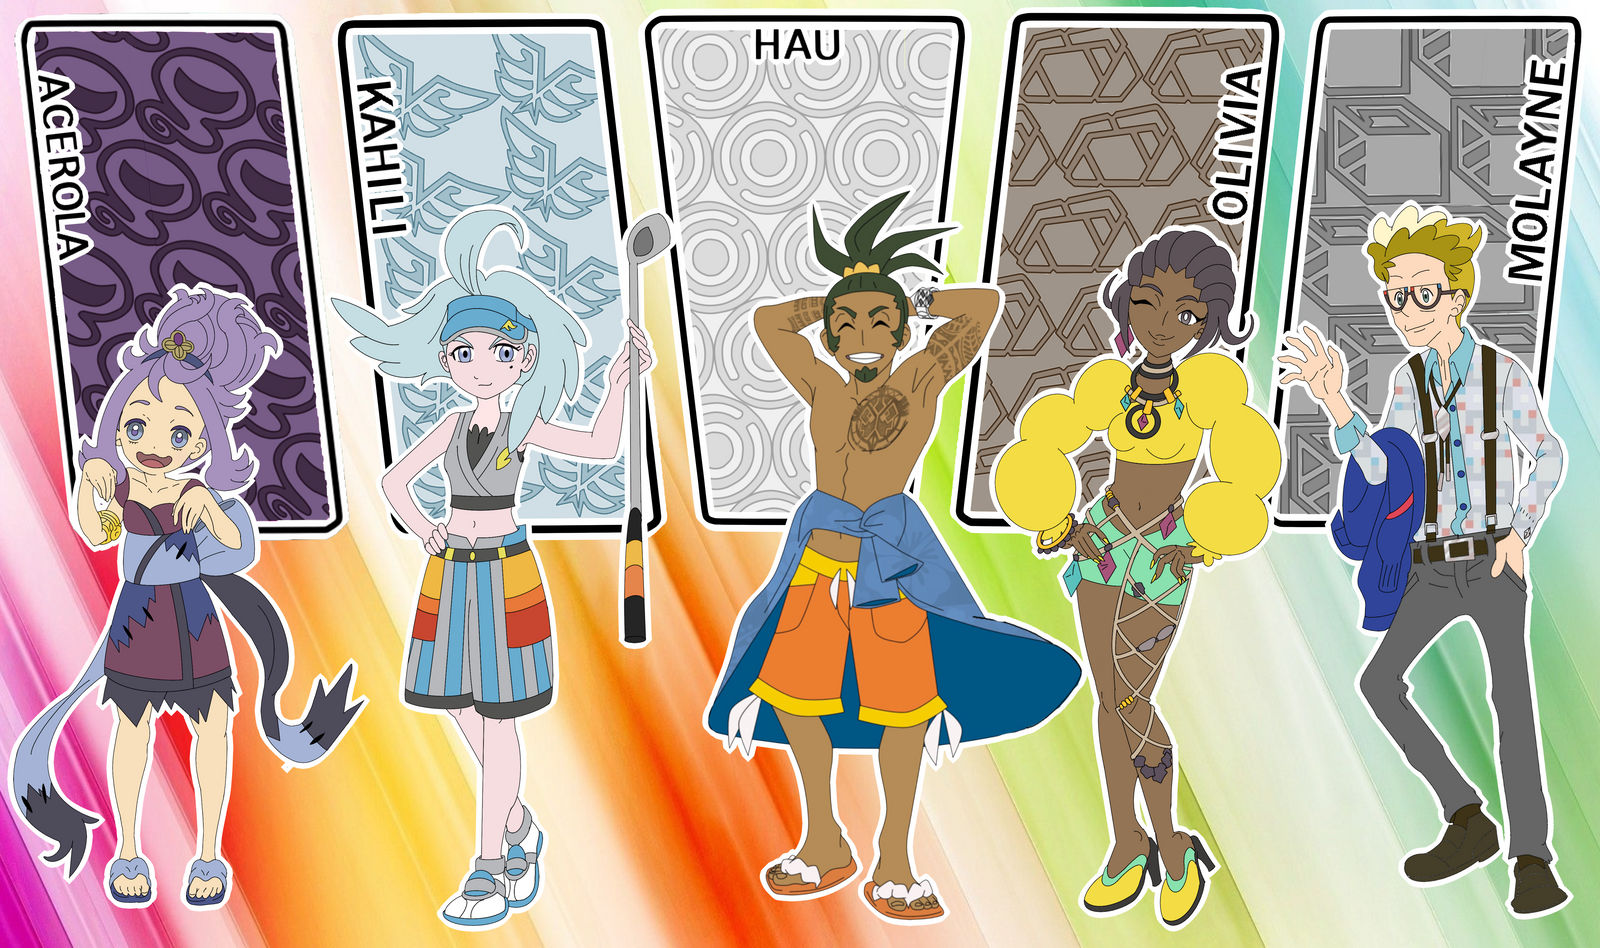 Take a Different Kind of Alola Island Challenge with the Alola